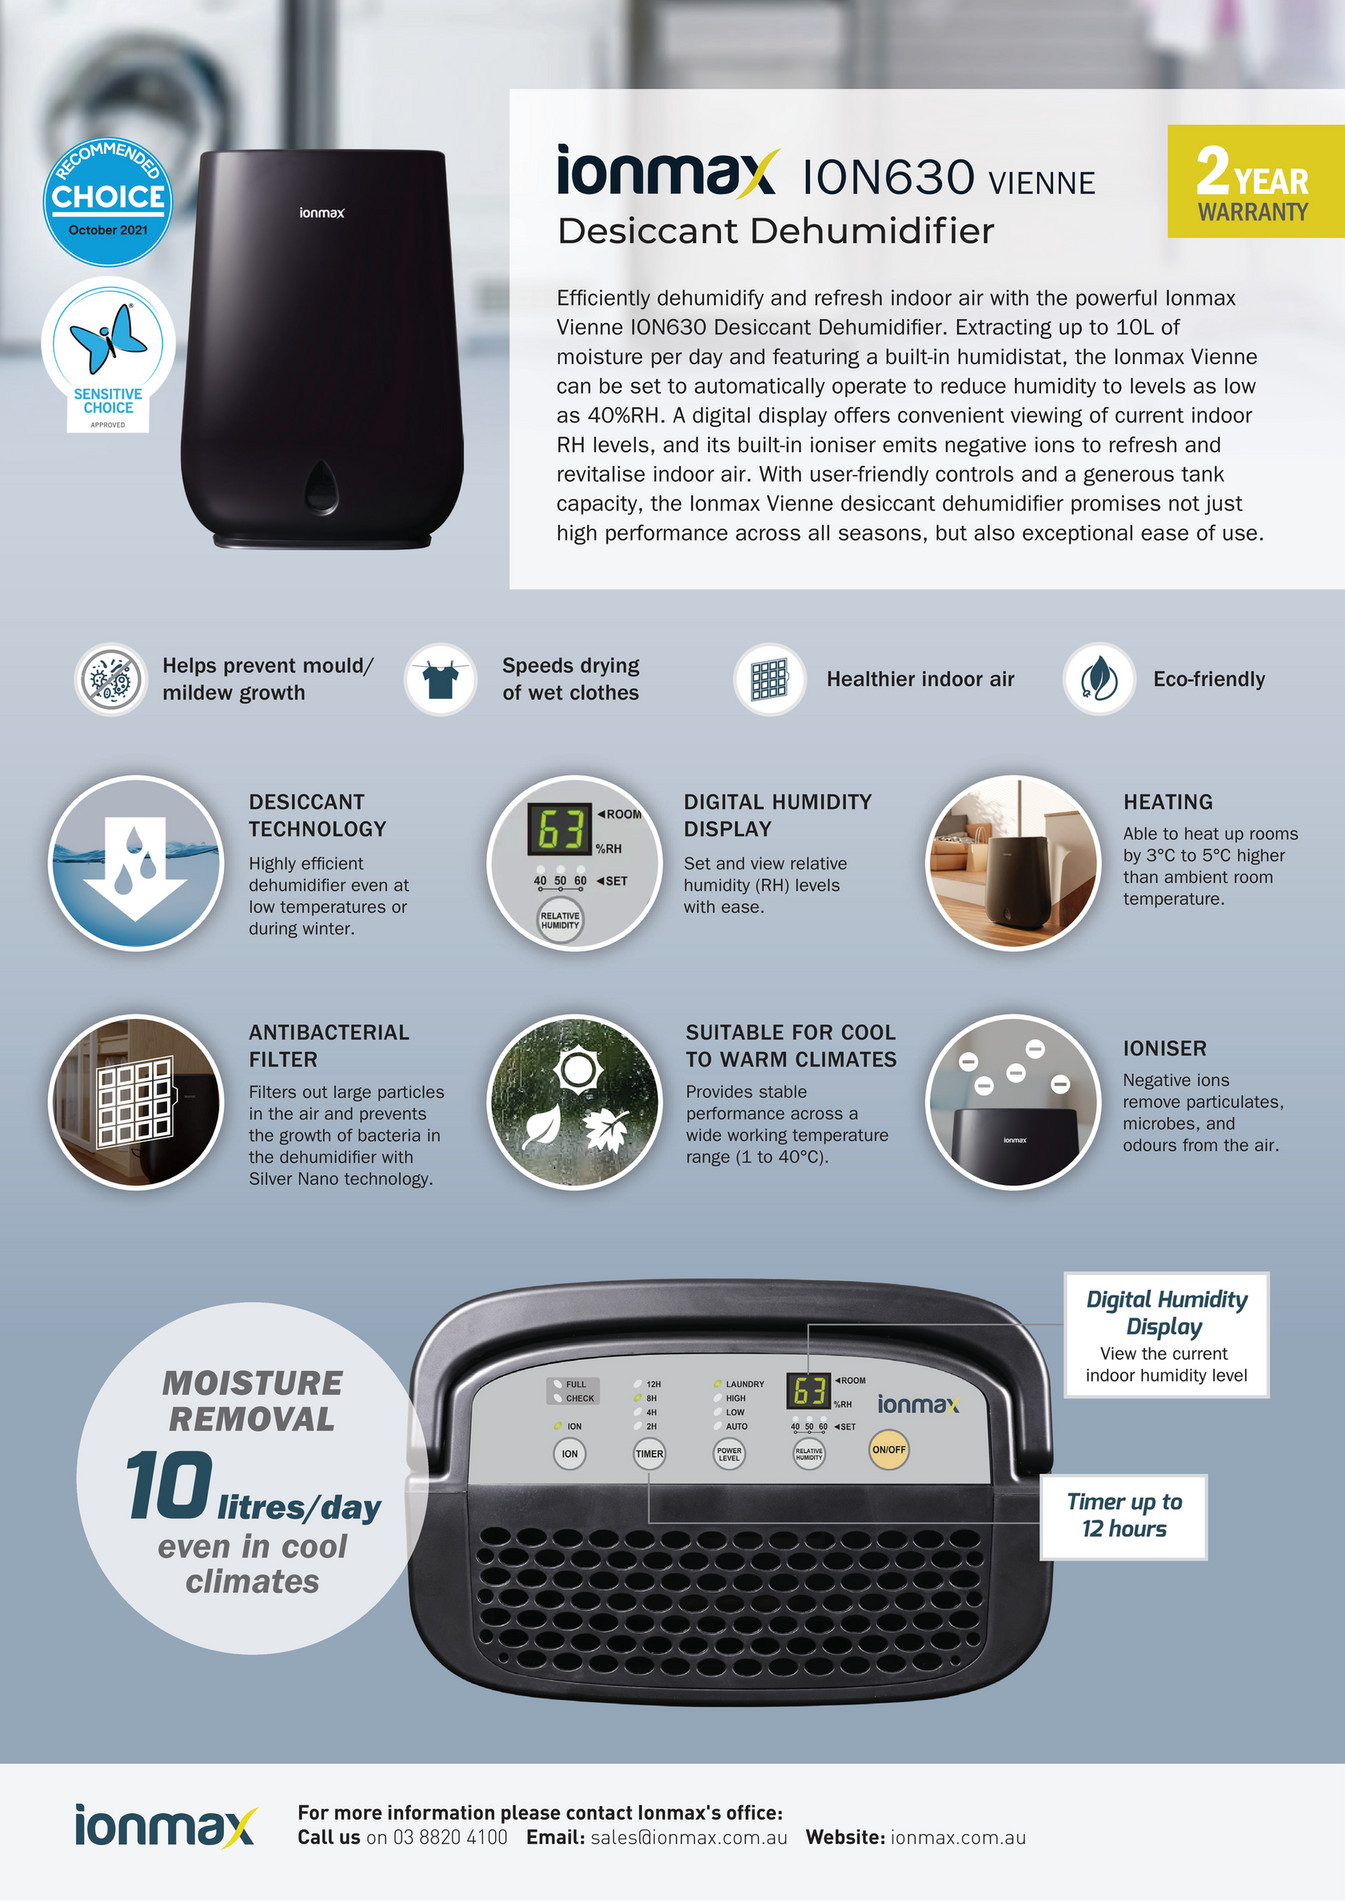 Andatech Ionmax Vienne Ion630 Desiccant Dehumidifier Fact Sheet